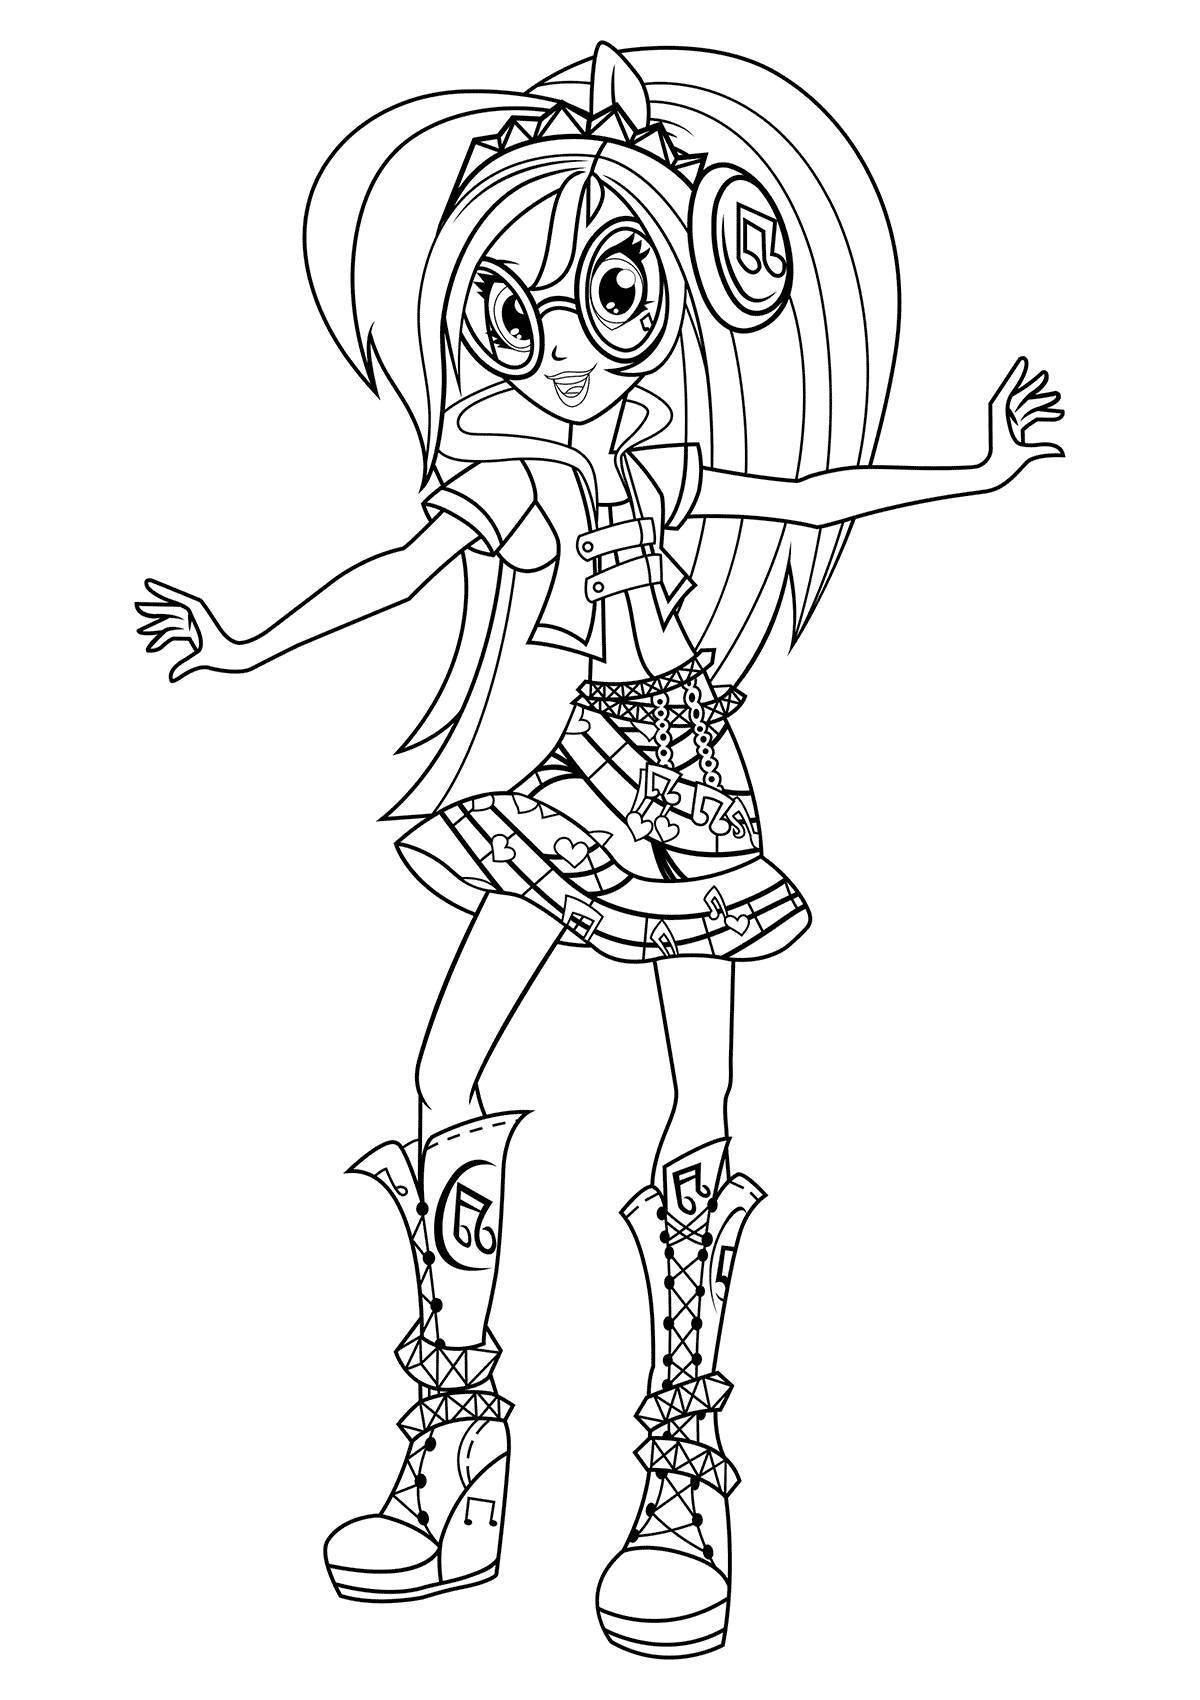 Animated Equestria Girls Coloring Pages